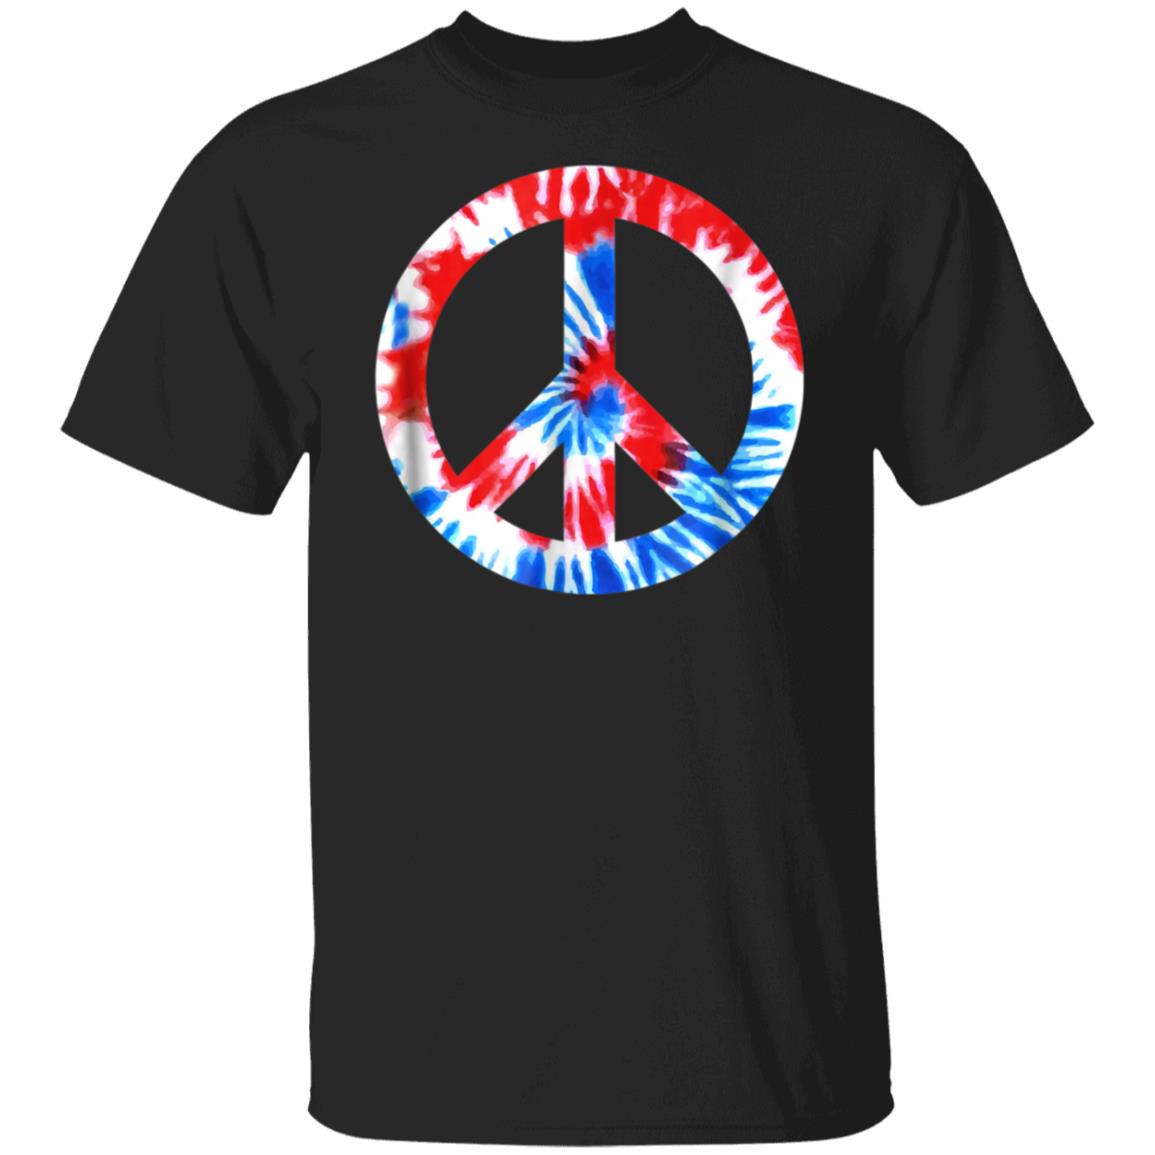 Patriotic Tie Dye Peace Sign Shirt 4th of July Parade Tee